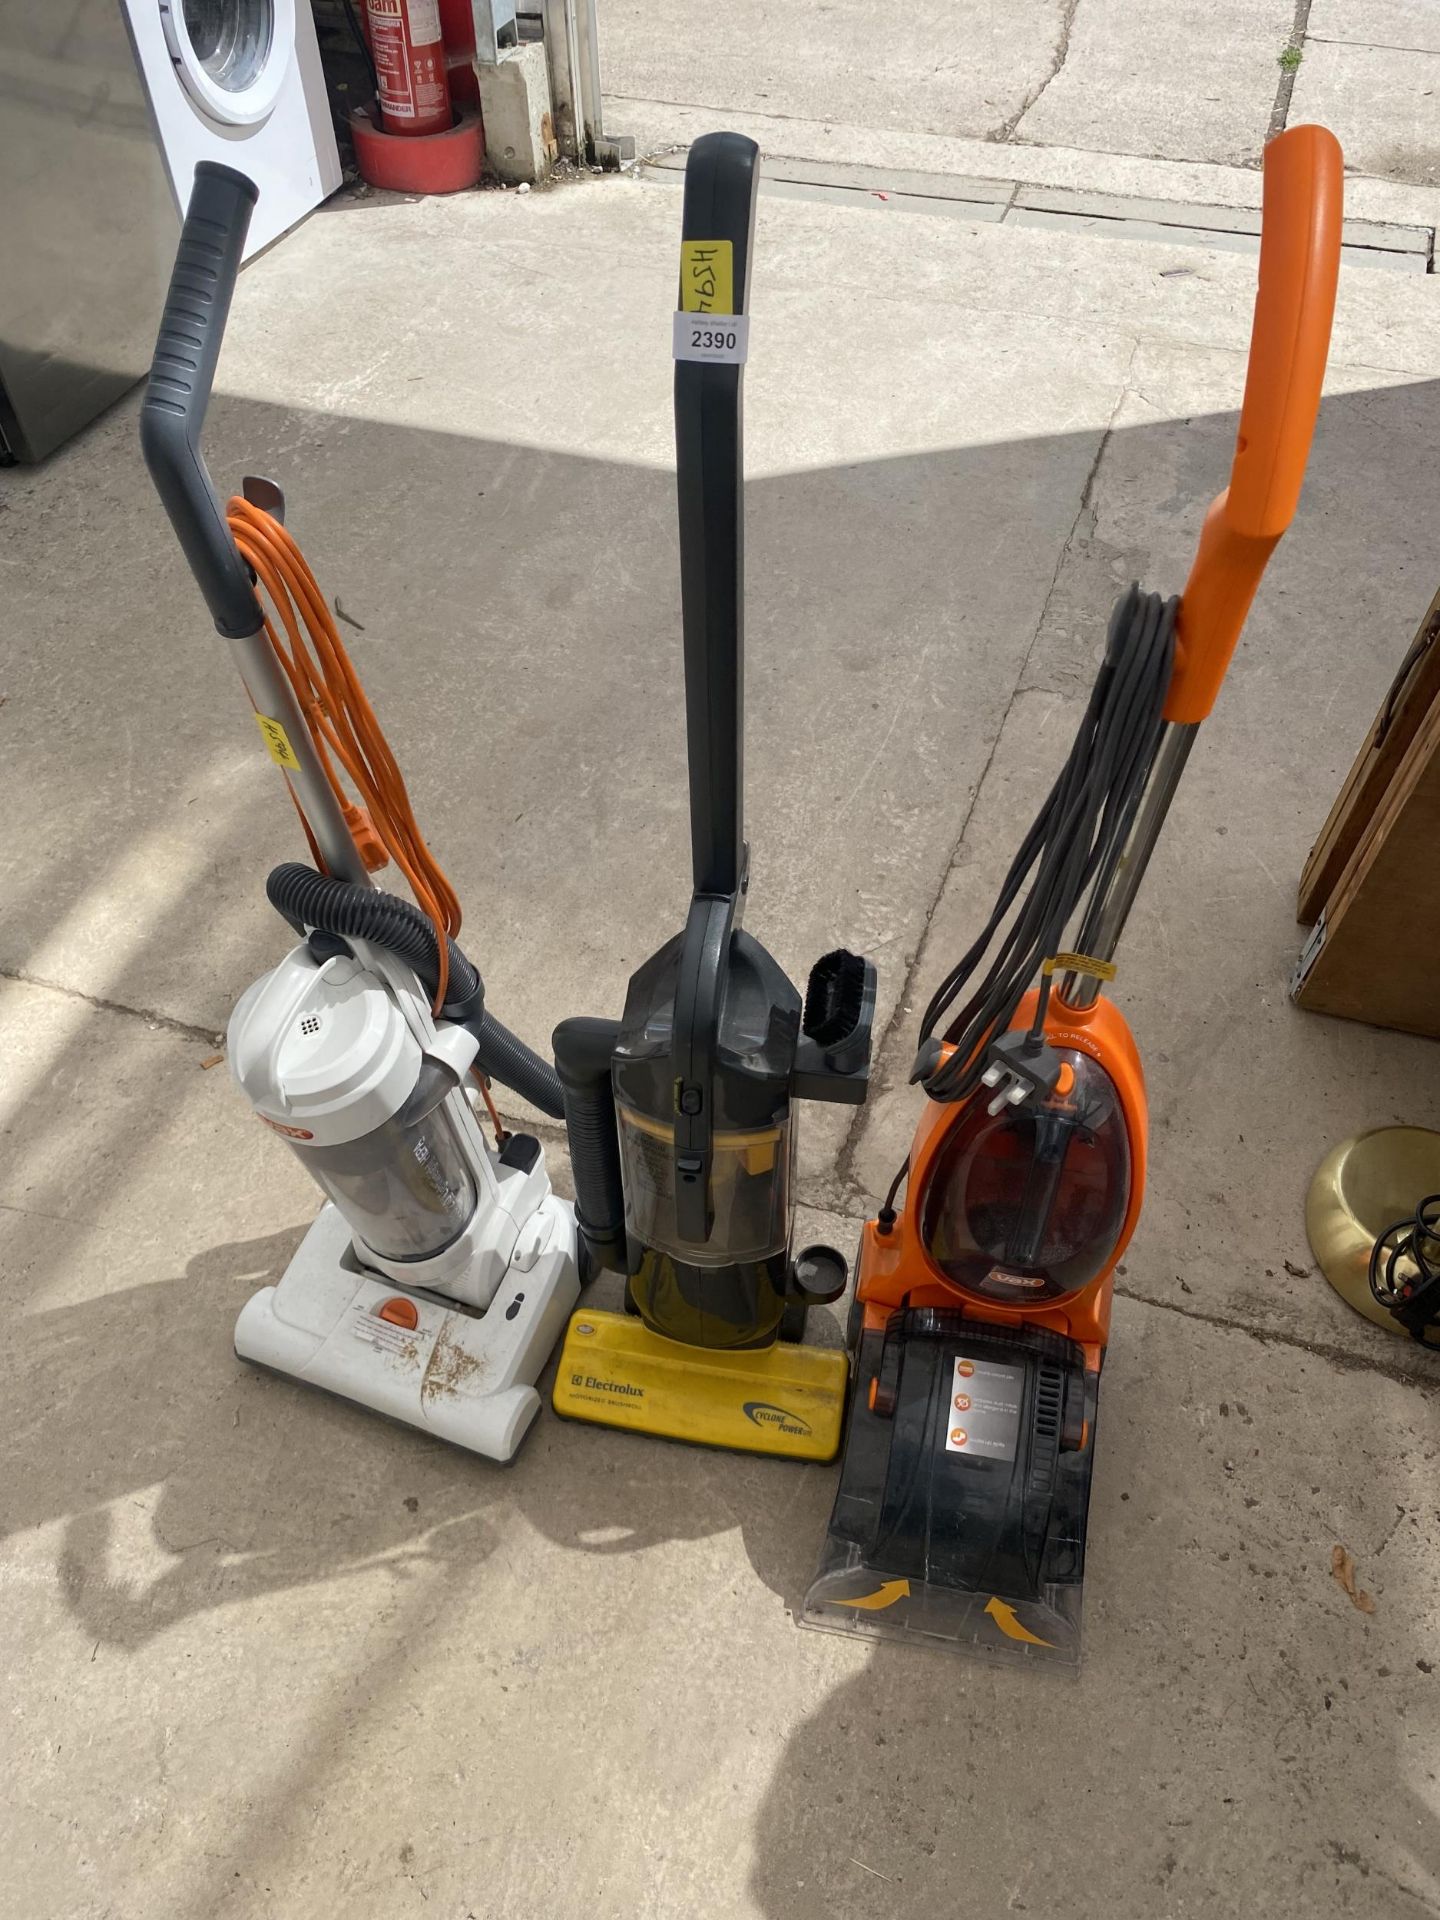 TWO VACUUM CLEANERS, A CARPET CLEANER AND A LAMP